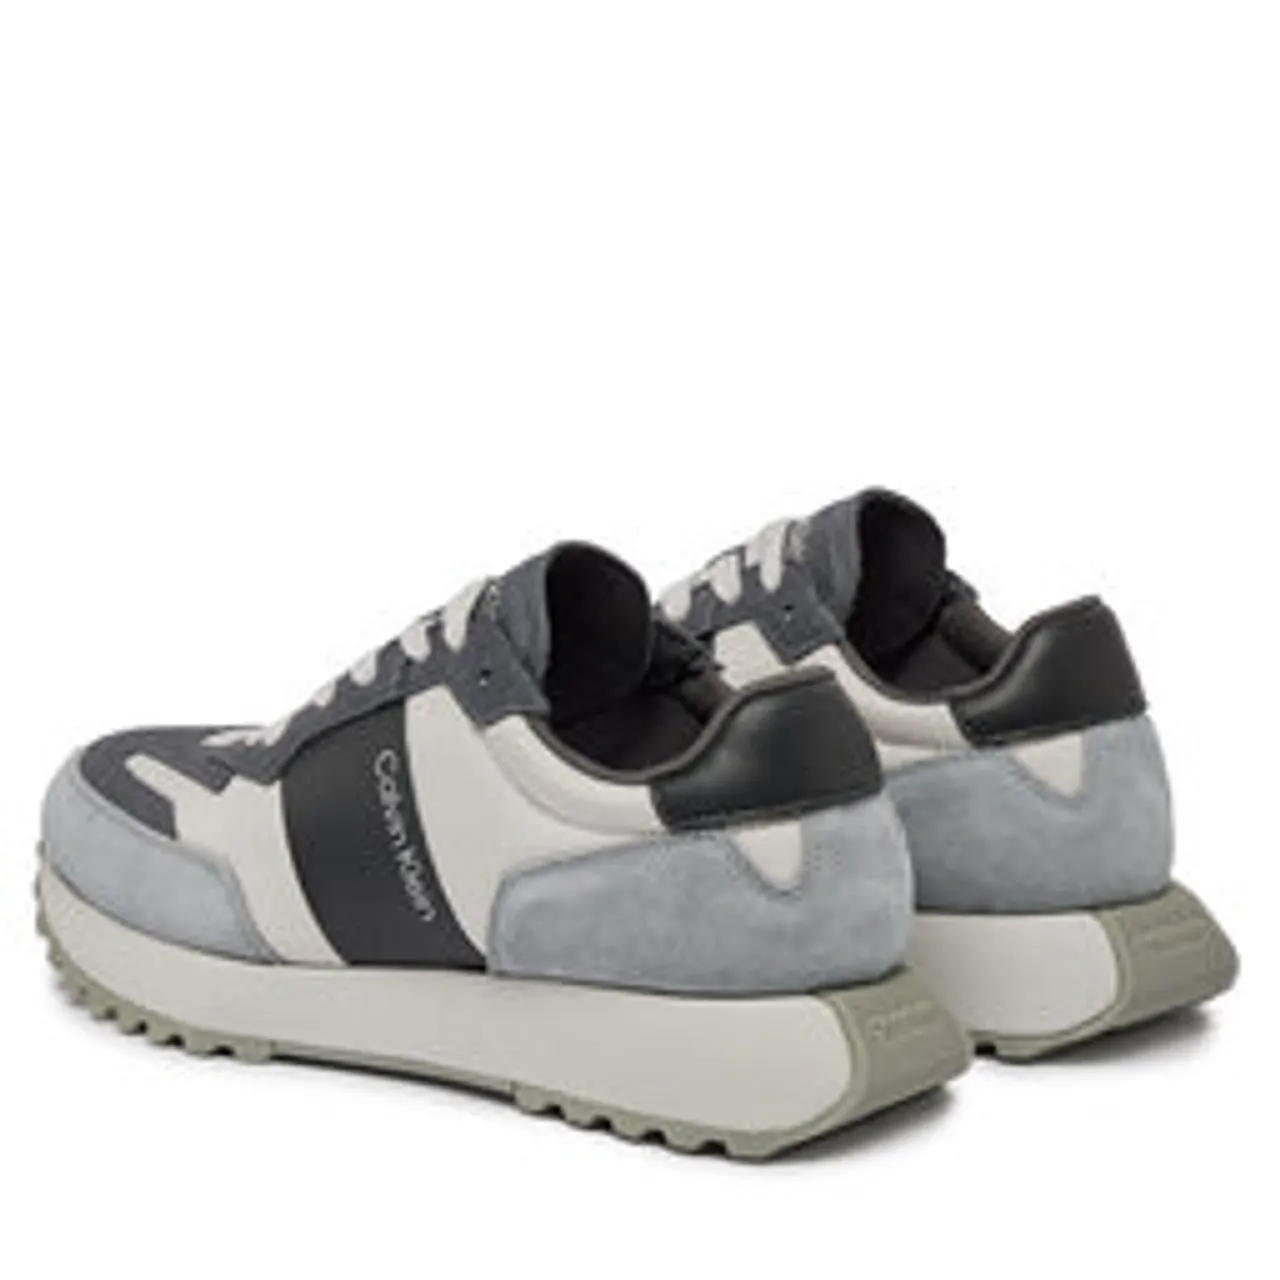 Sneakers Calvin Klein Low Top Lace Up Mix HM0HM00497 Granite Road/Magnet/Light Grey 0IO